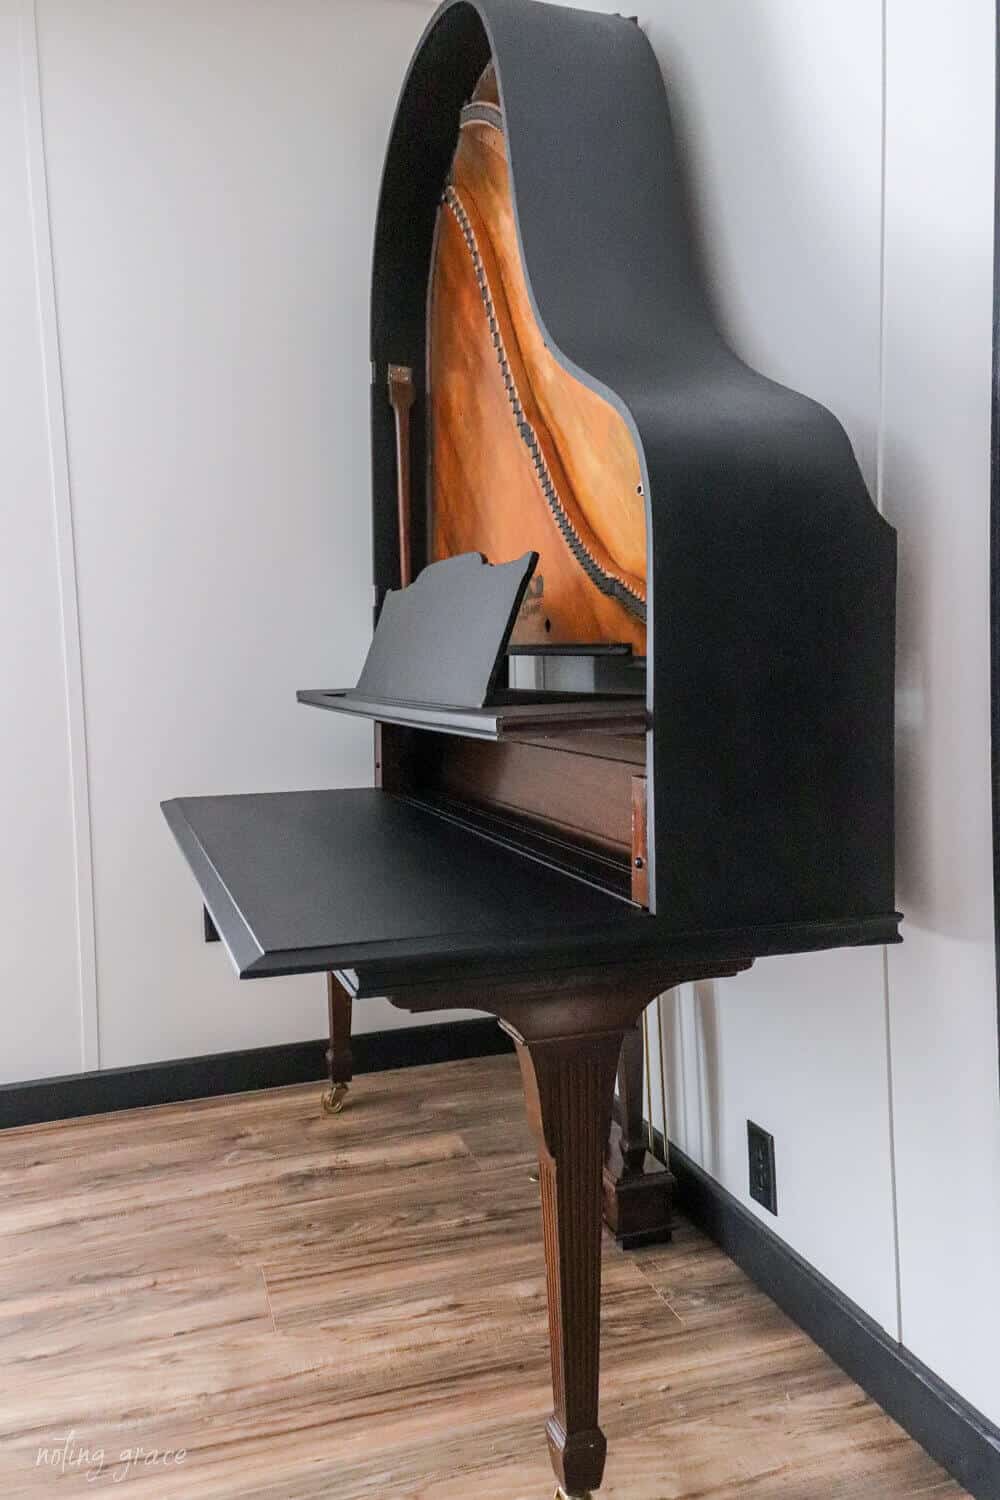 old piano reinvented into a desk or keyboard stand